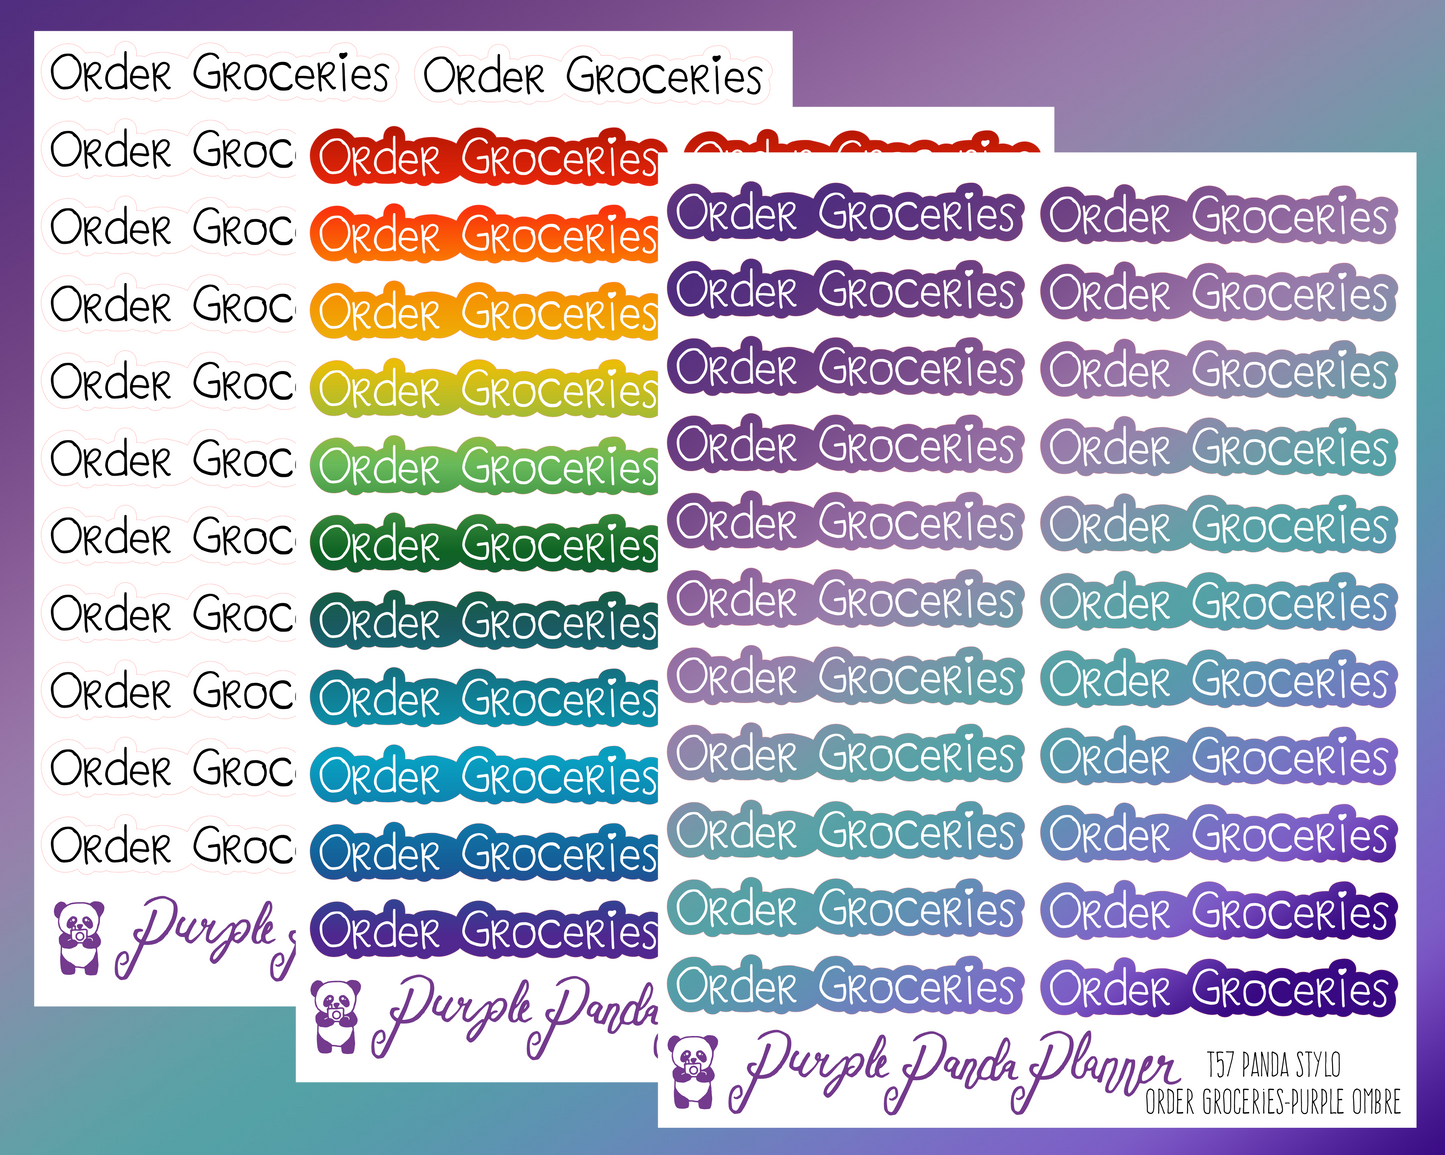 Order Groceries (T57) - Panda Stylo Script - Black, Rainbow, or Purple Ombre - Stickers for Planner, Journal or Calendar